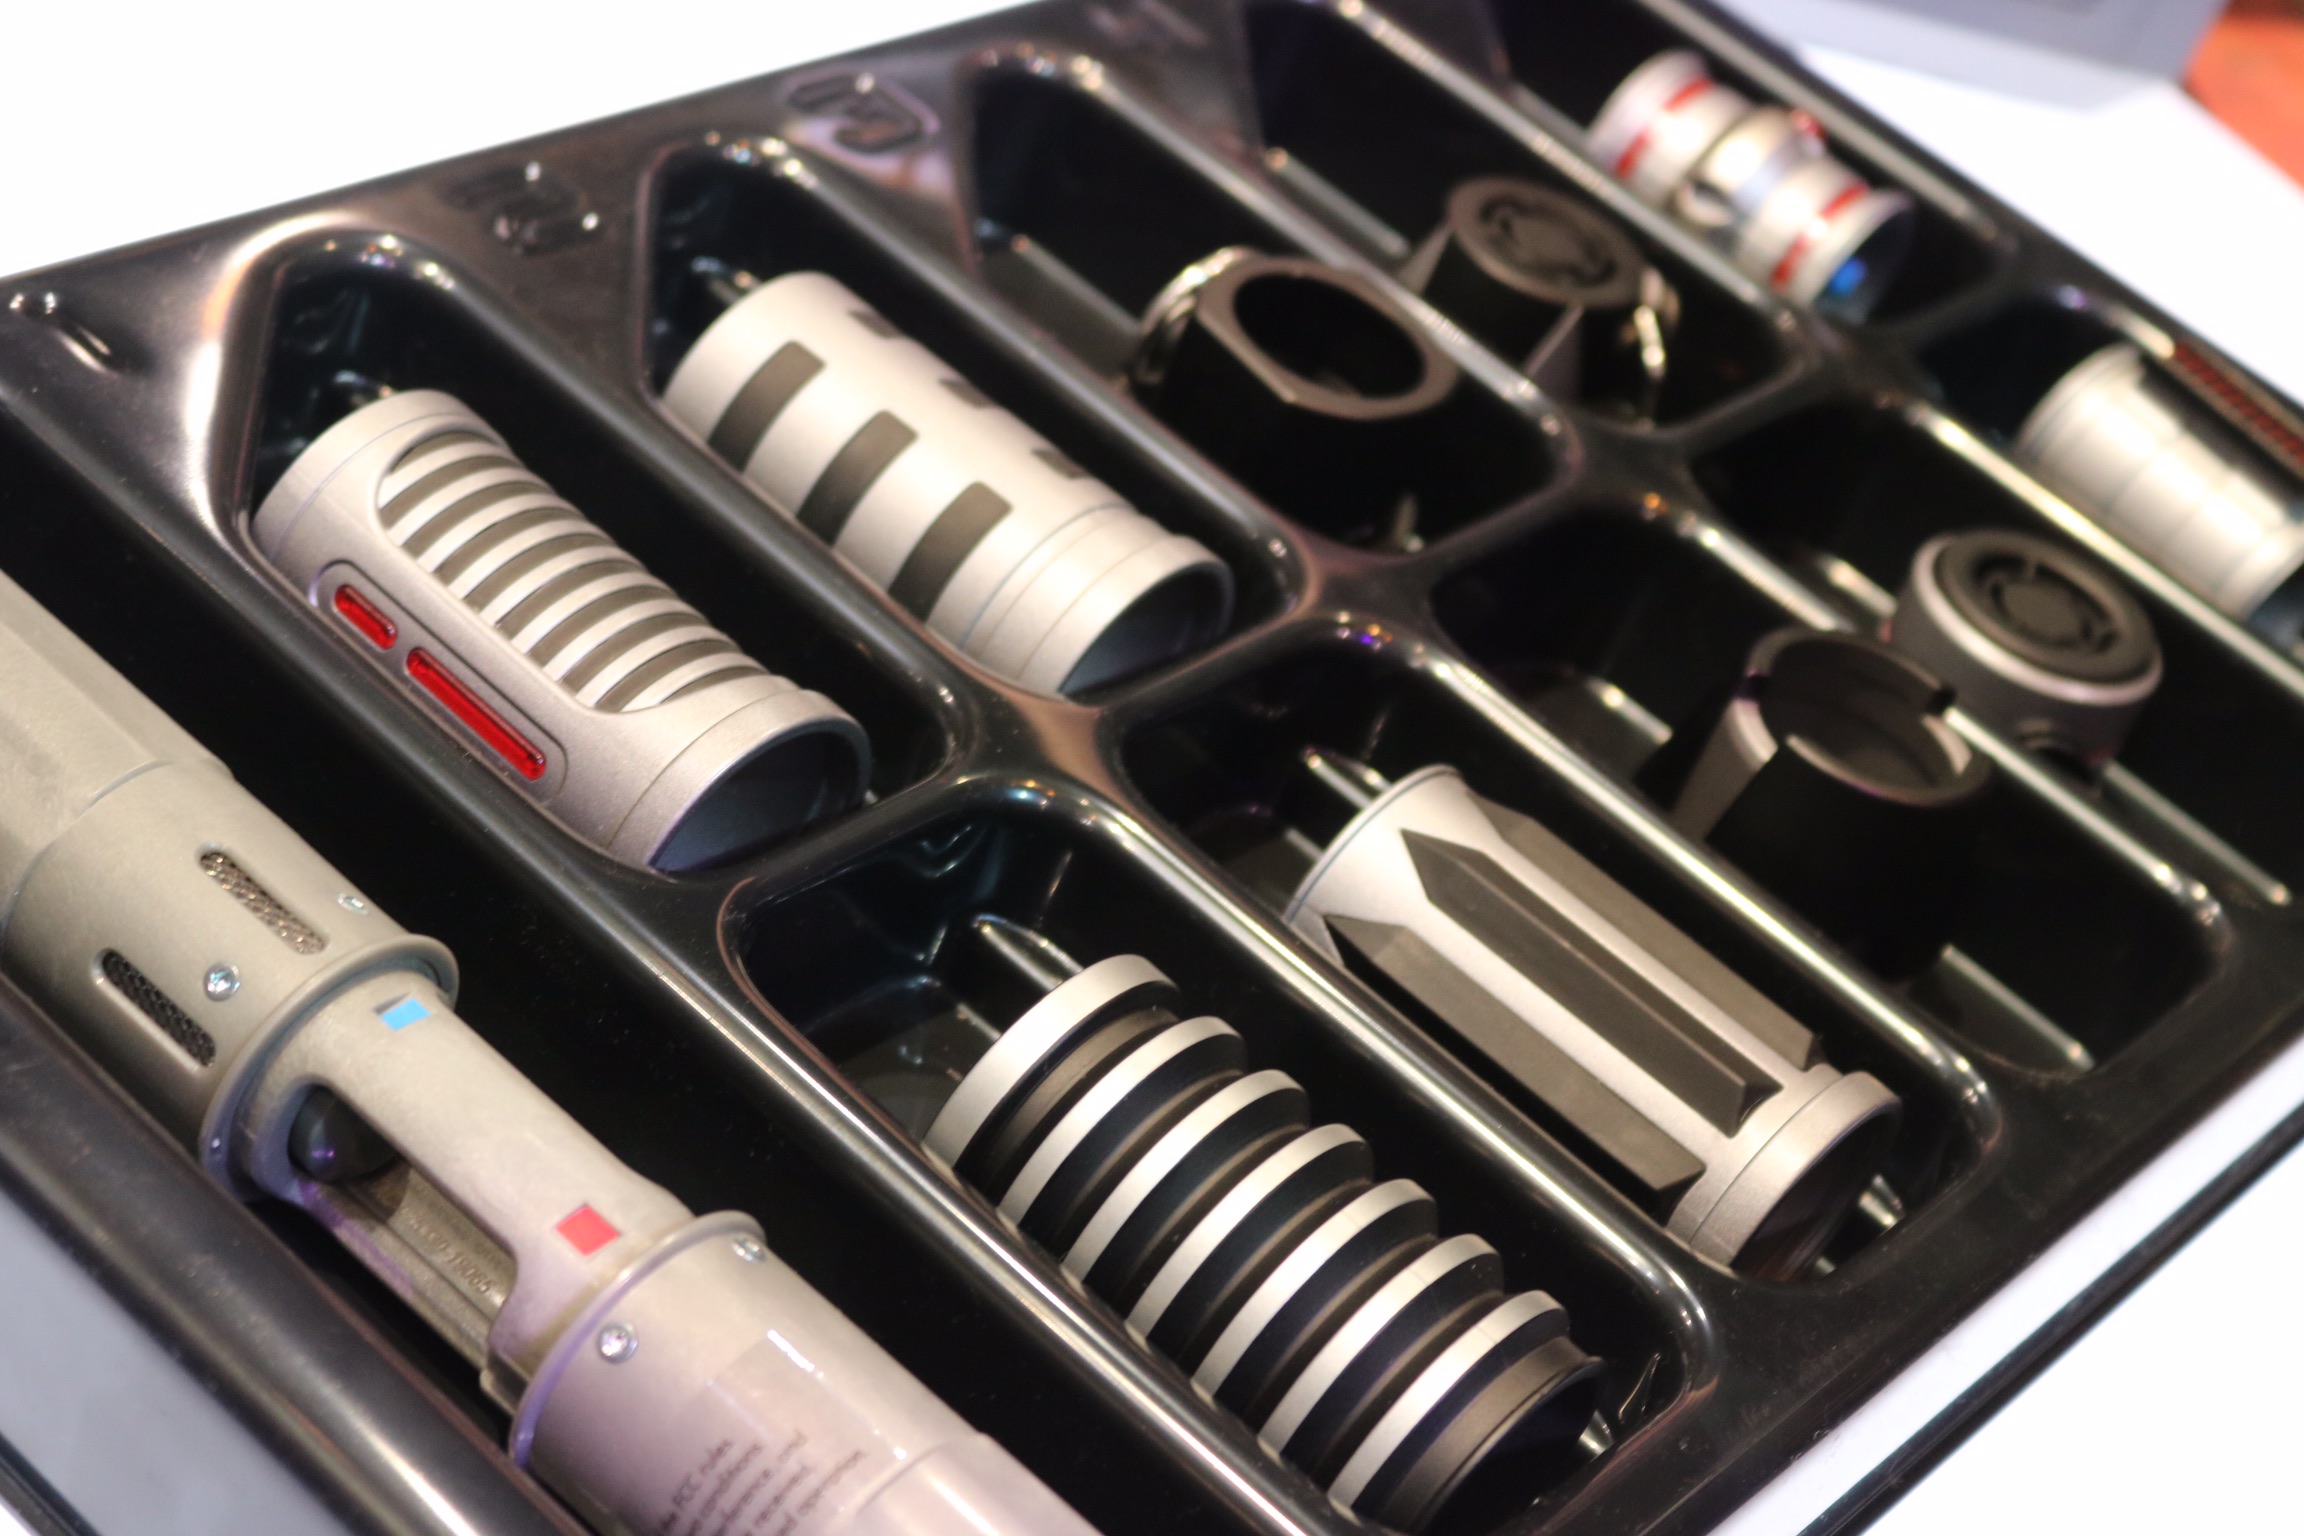 Depending on which trait is chosen, a wide array of parts become available to create a truly custom lightsaber.